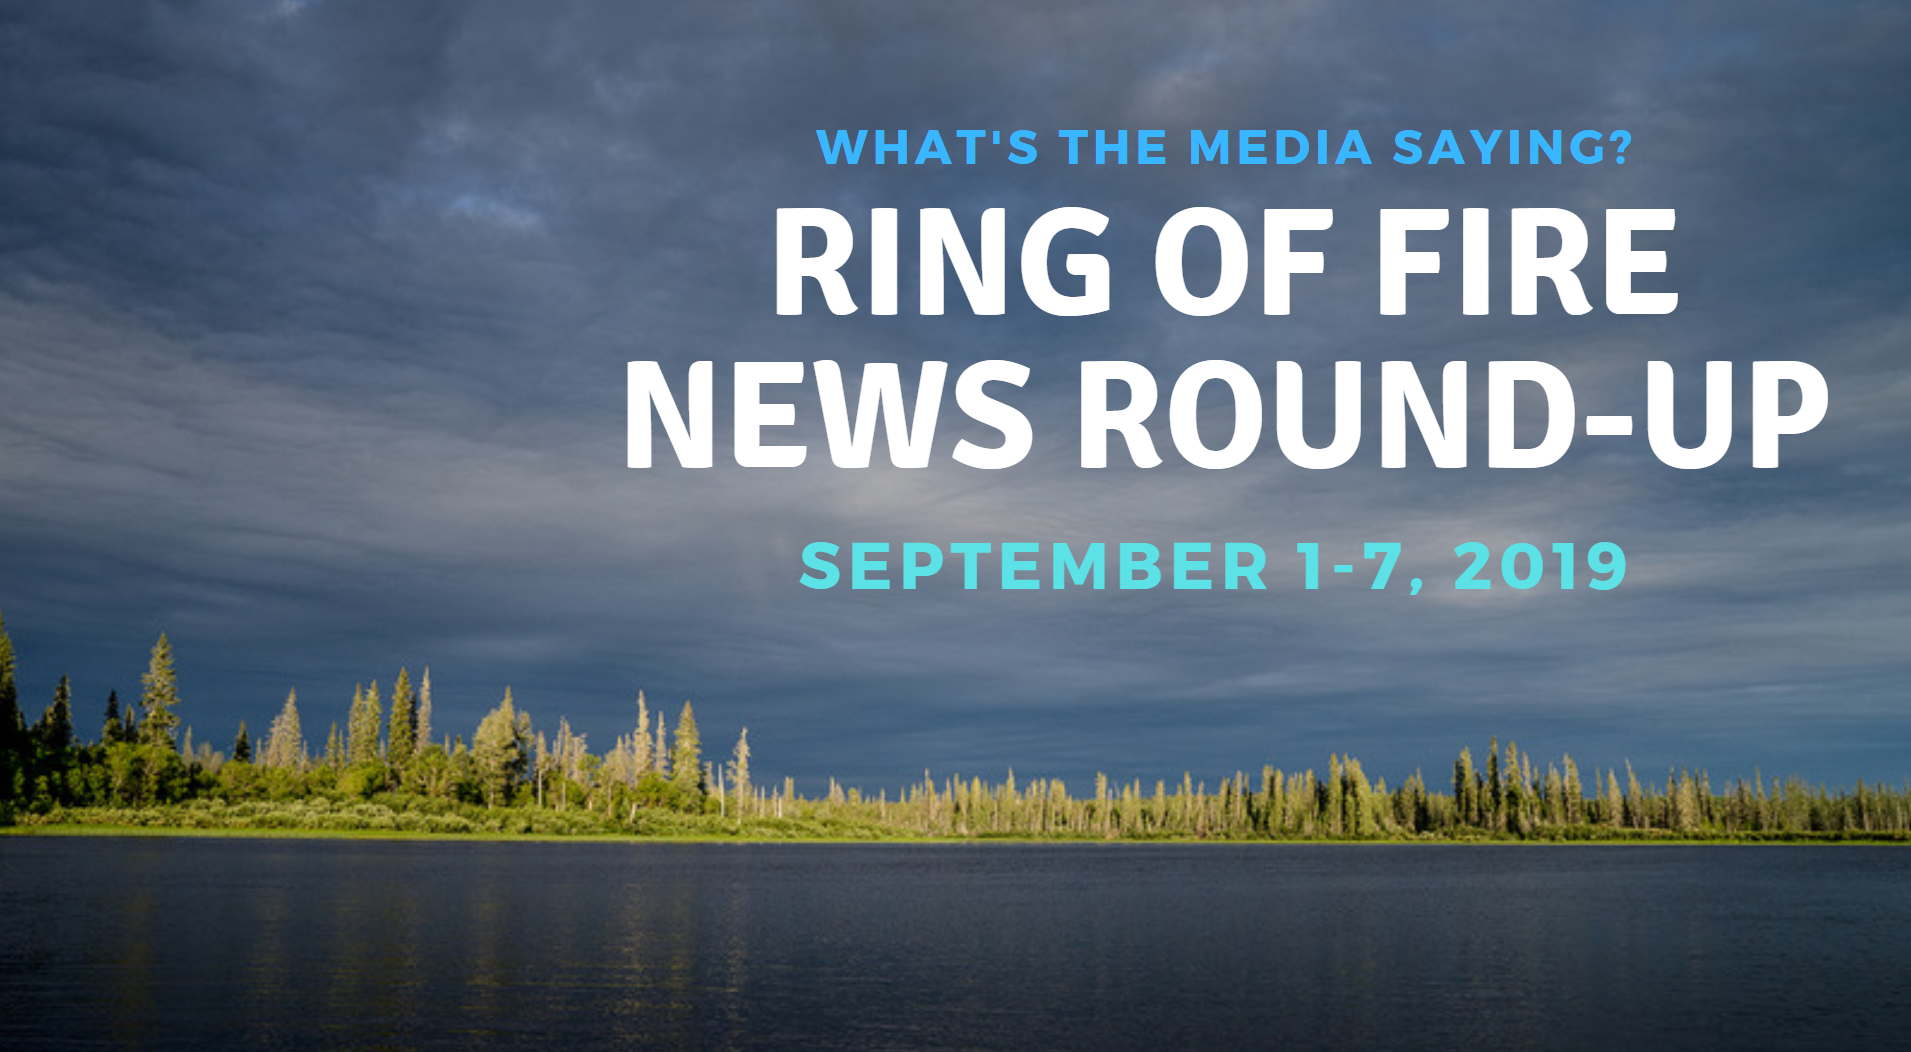 The text "What's the Media Saying? Ring of Fire News Round-Up, September 1-7 2019", overlaid on top of a photo of the Attawapiskat River as a storm approaches.